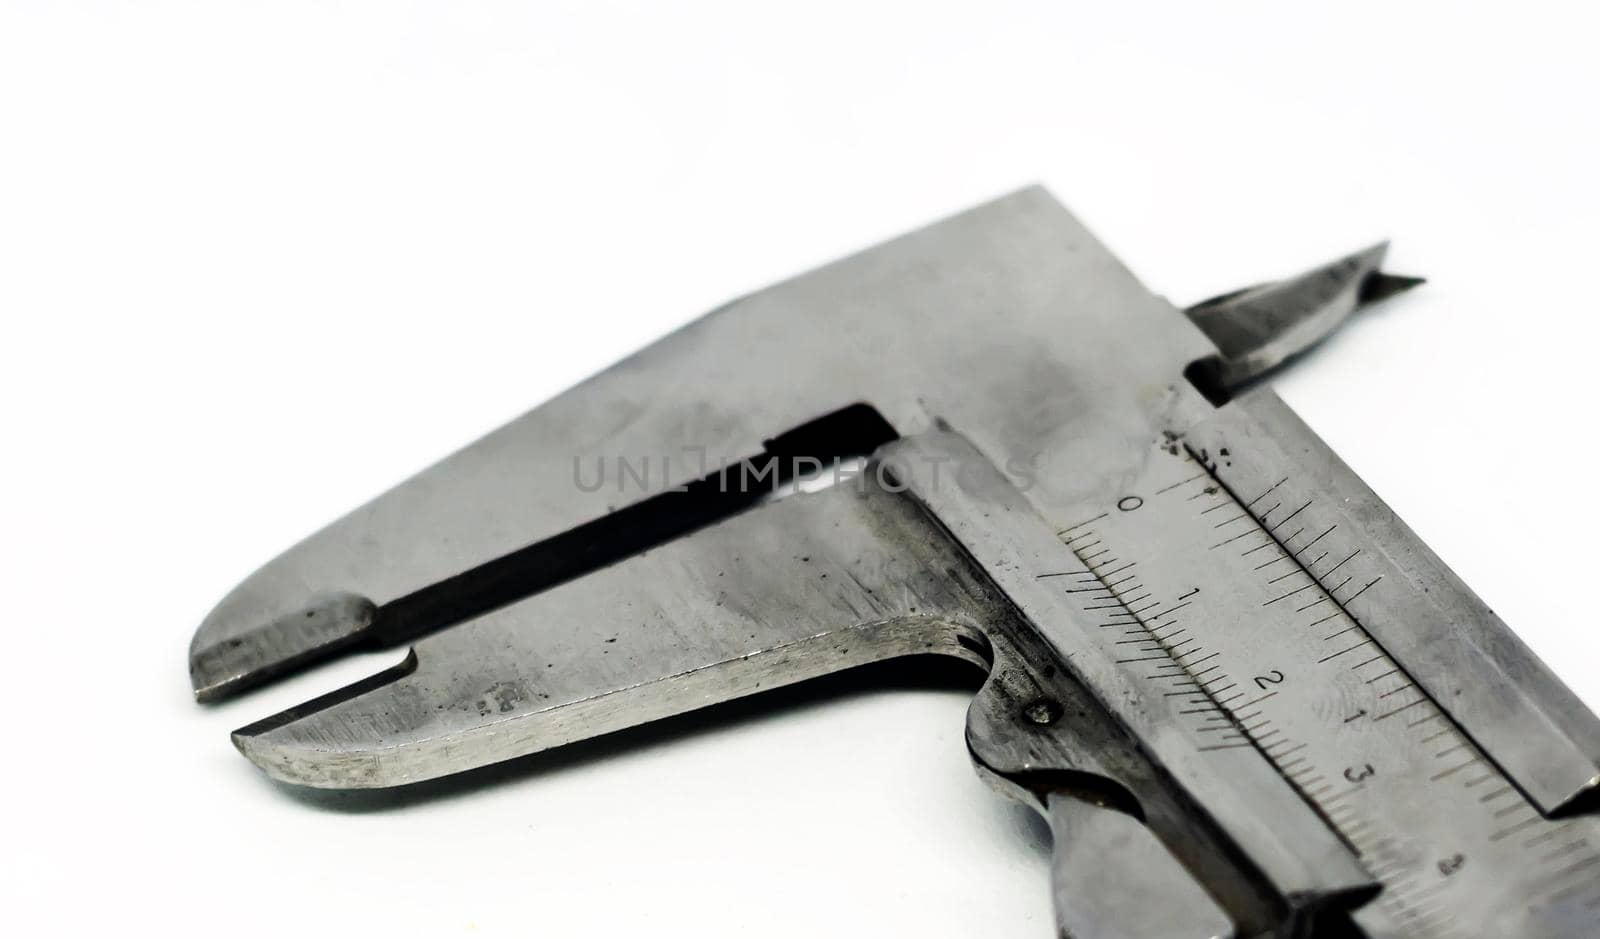 Detail view of a metallic caliper used to measure the distance between two opposite sides of an object. Engineering and construction industry. Isolated on a white background